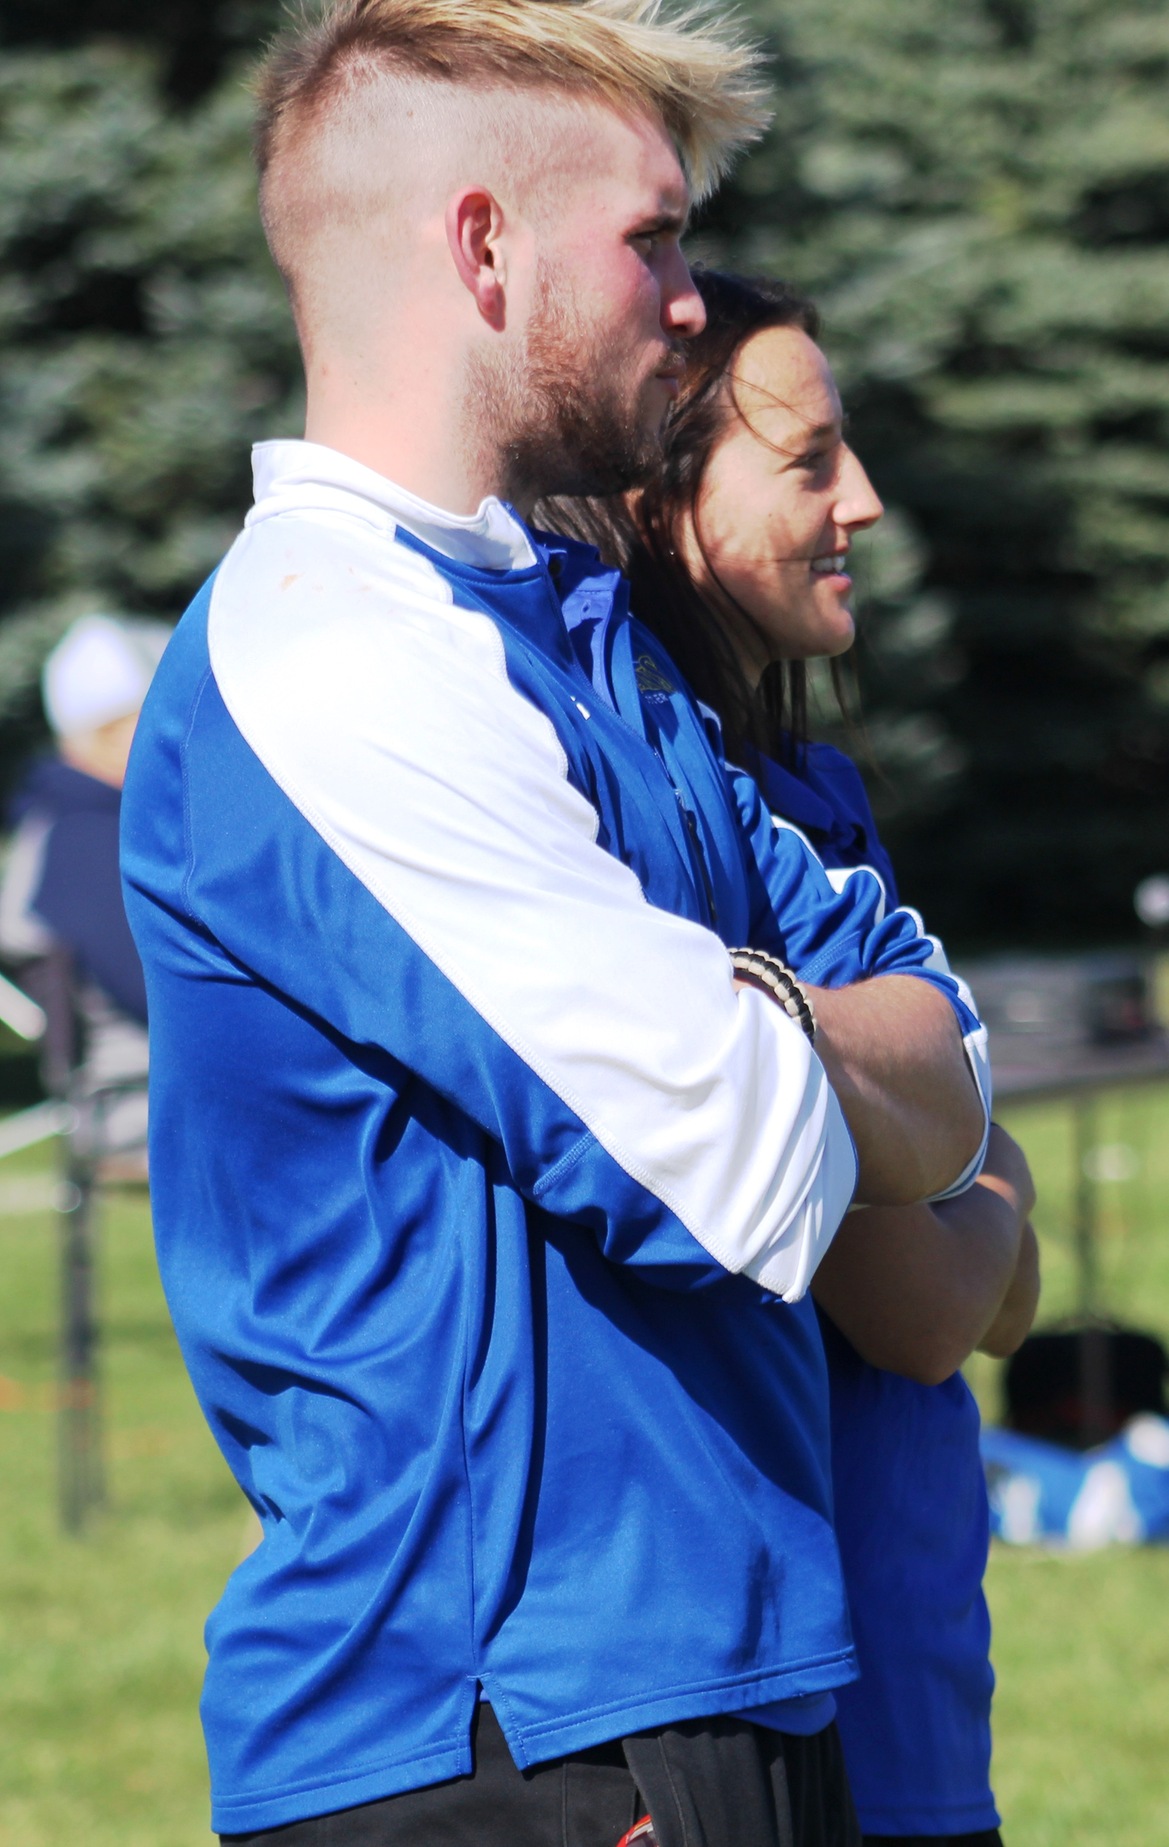 Leo Driscoll will be the head coach of both the NIACC men's and women's program this fall.